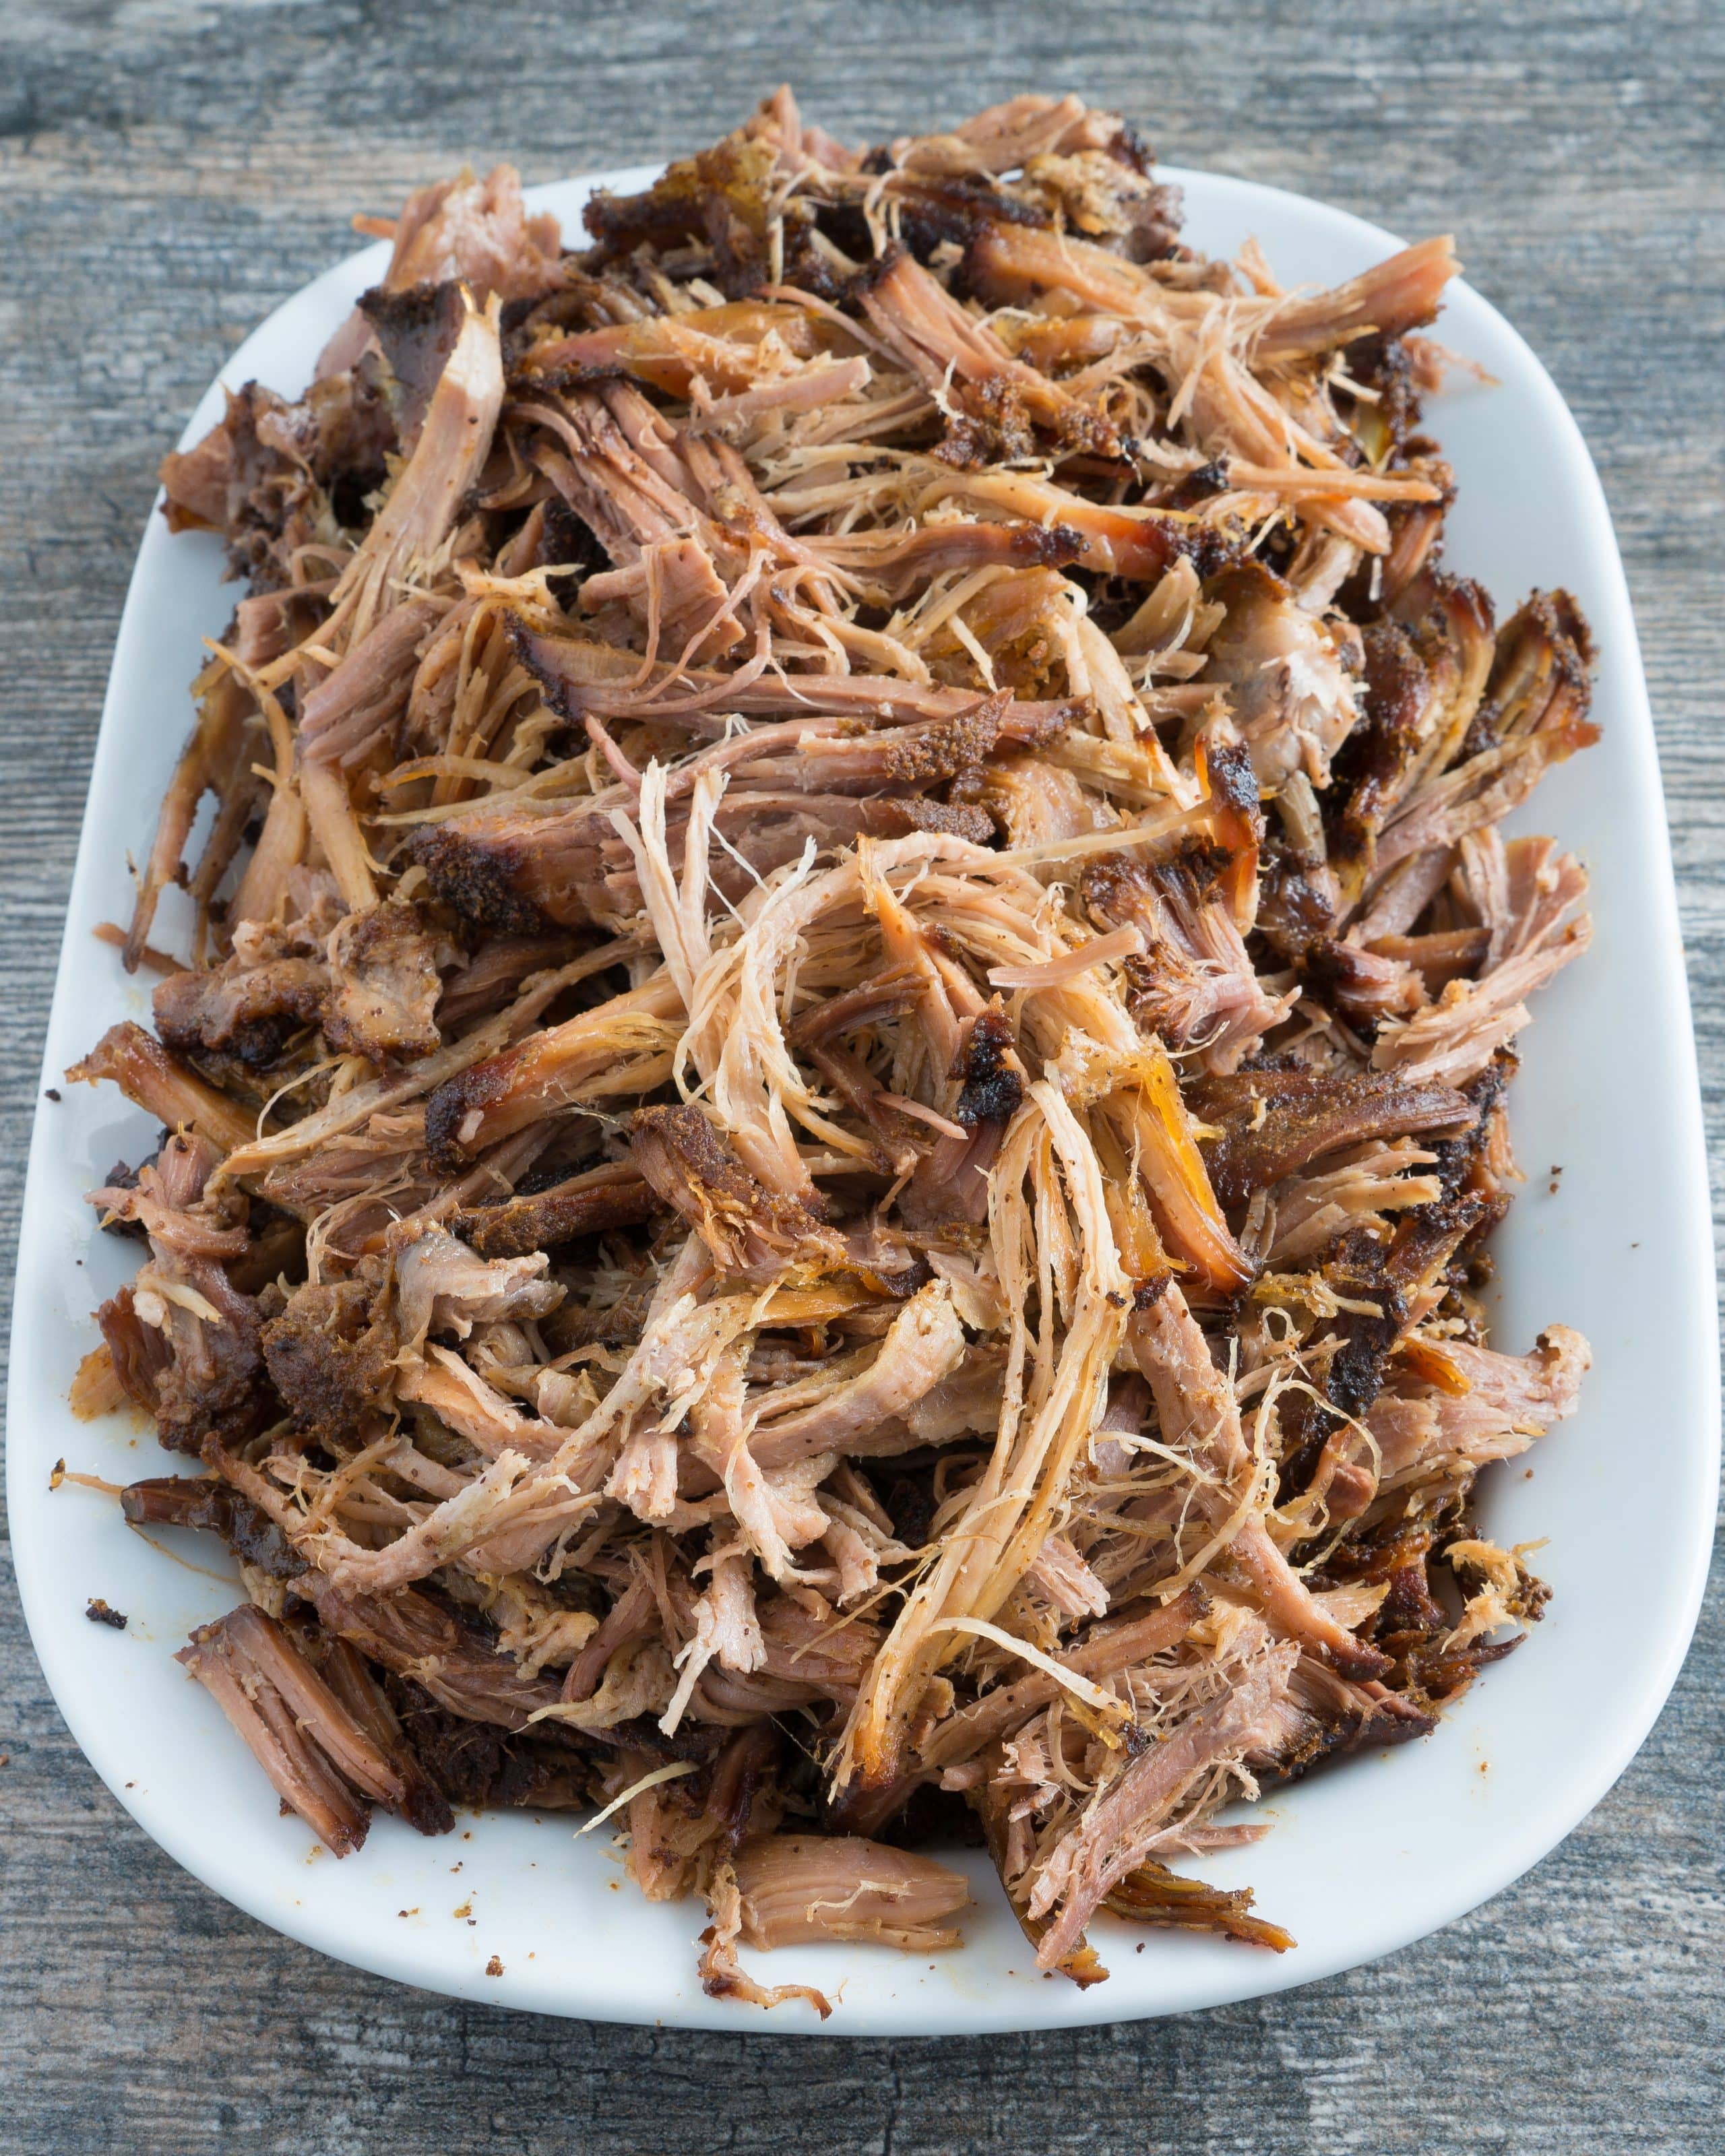 Crispy Crockpot Carnitas – Easy recipe for homemade Crispy Crockpot Carnitas. Gluten-free and paleo-friendly! Perfect for tacos, burritos, nachos, enchiladas, sandwiches, and more! Just combine pork shoulder with a simple dry-rub & a squeeze of citrus, then let your slow cooker do the rest. We love this on top of eggs for a quick, savory breakfast! ♥ | freeyourfork.com